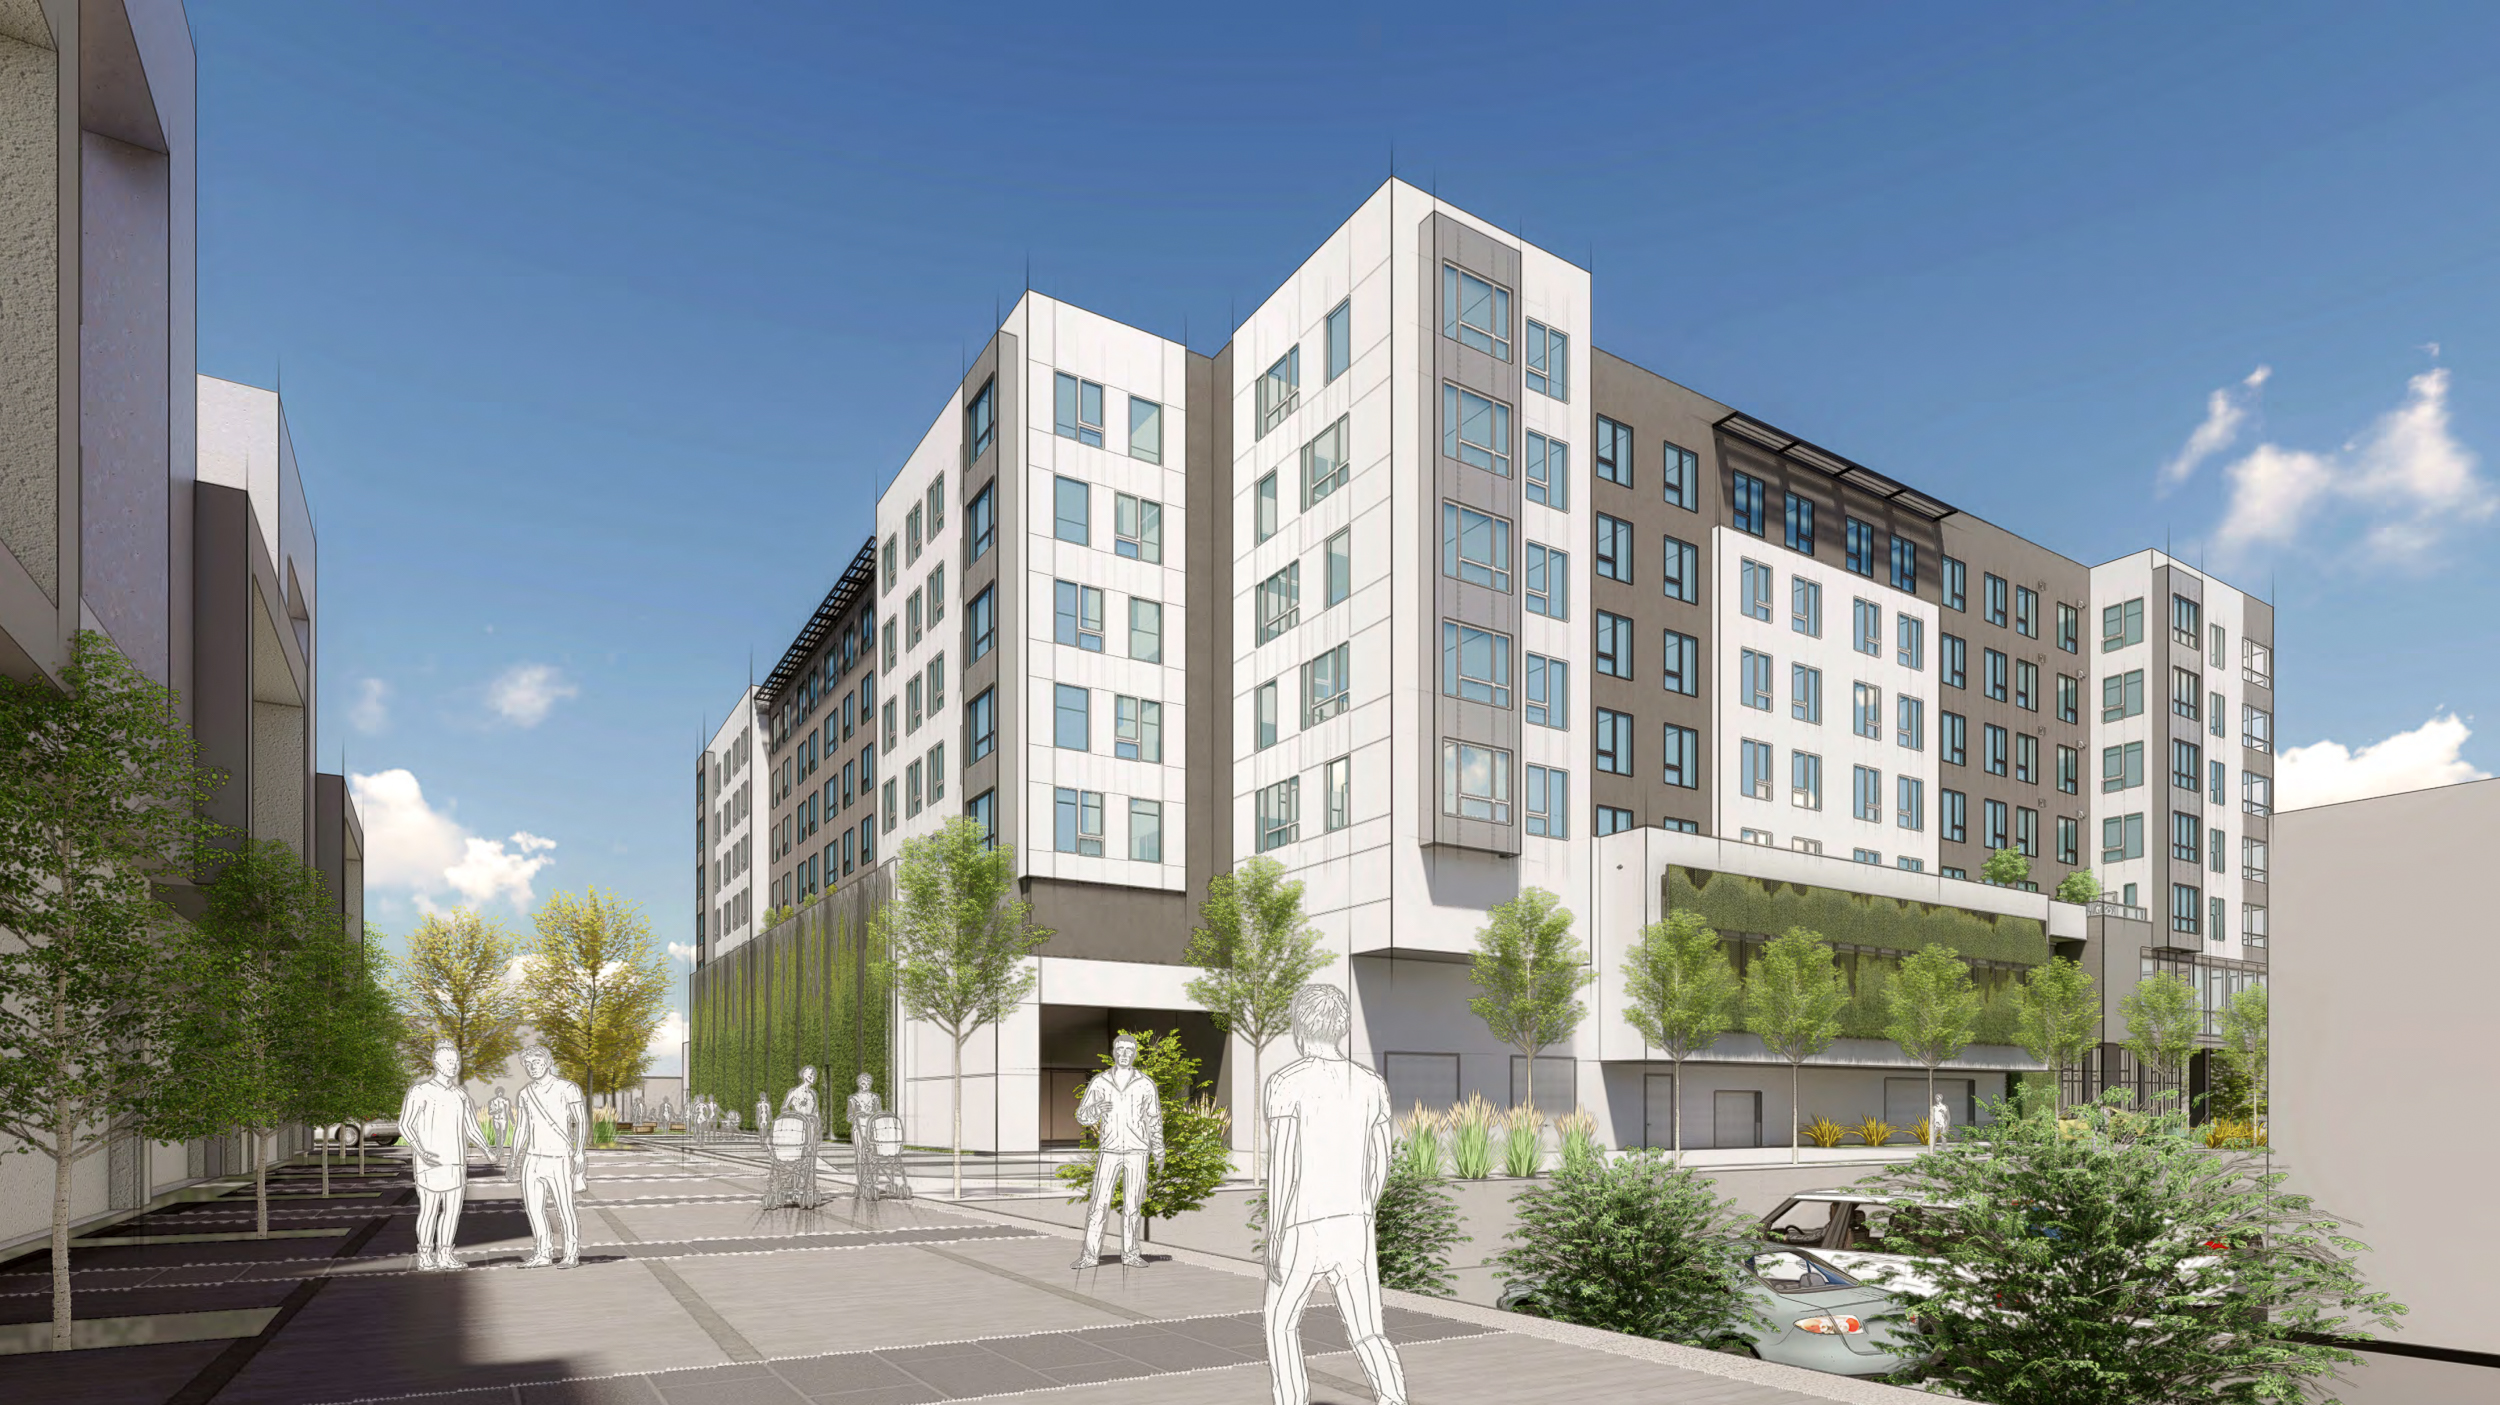 Menlo Flats view from Menlo Uptown Townhome Site, rendering by Heller Manus Architects, BDE Architecture